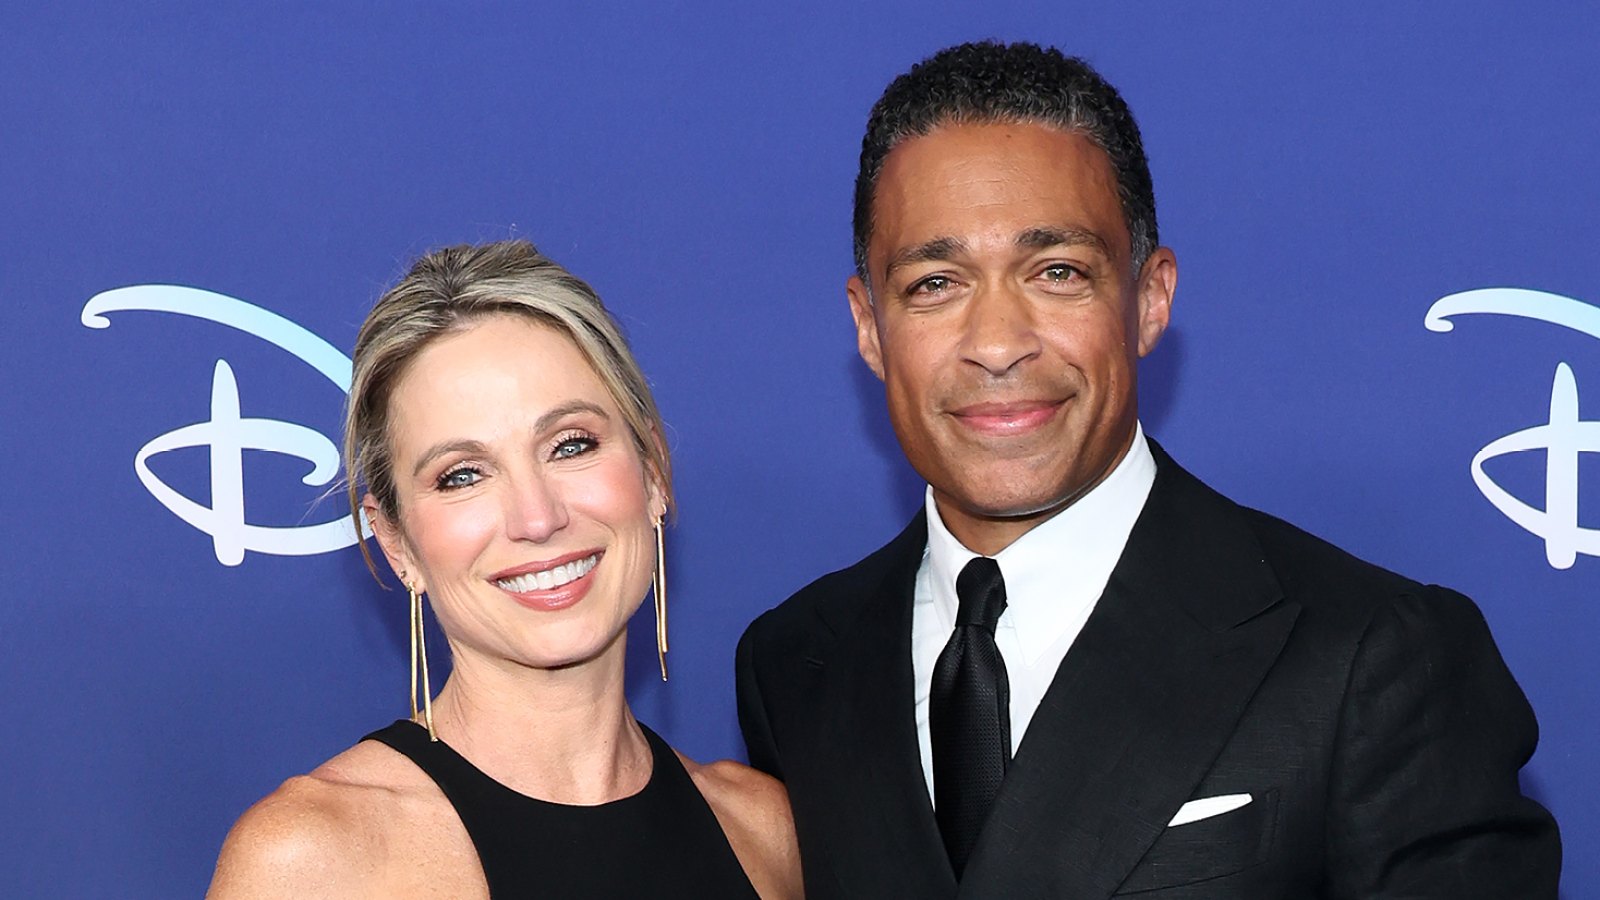 Amy Robach Returns to Instagram Months After T.J. Holmes 'Good Morning America' Scandal